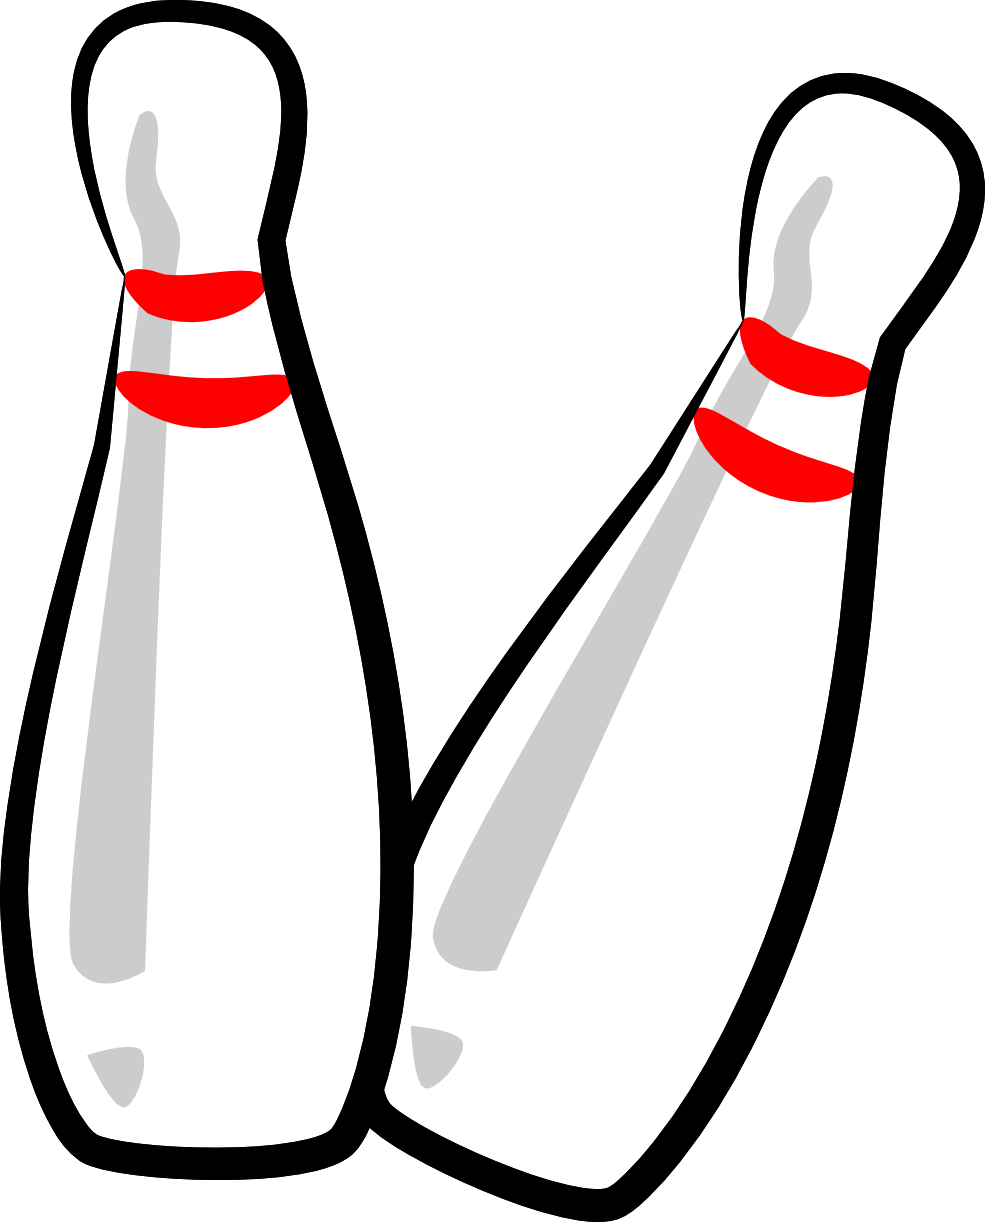 10 Bowling Pin Clipart Free Cliparts That You Can Download To You